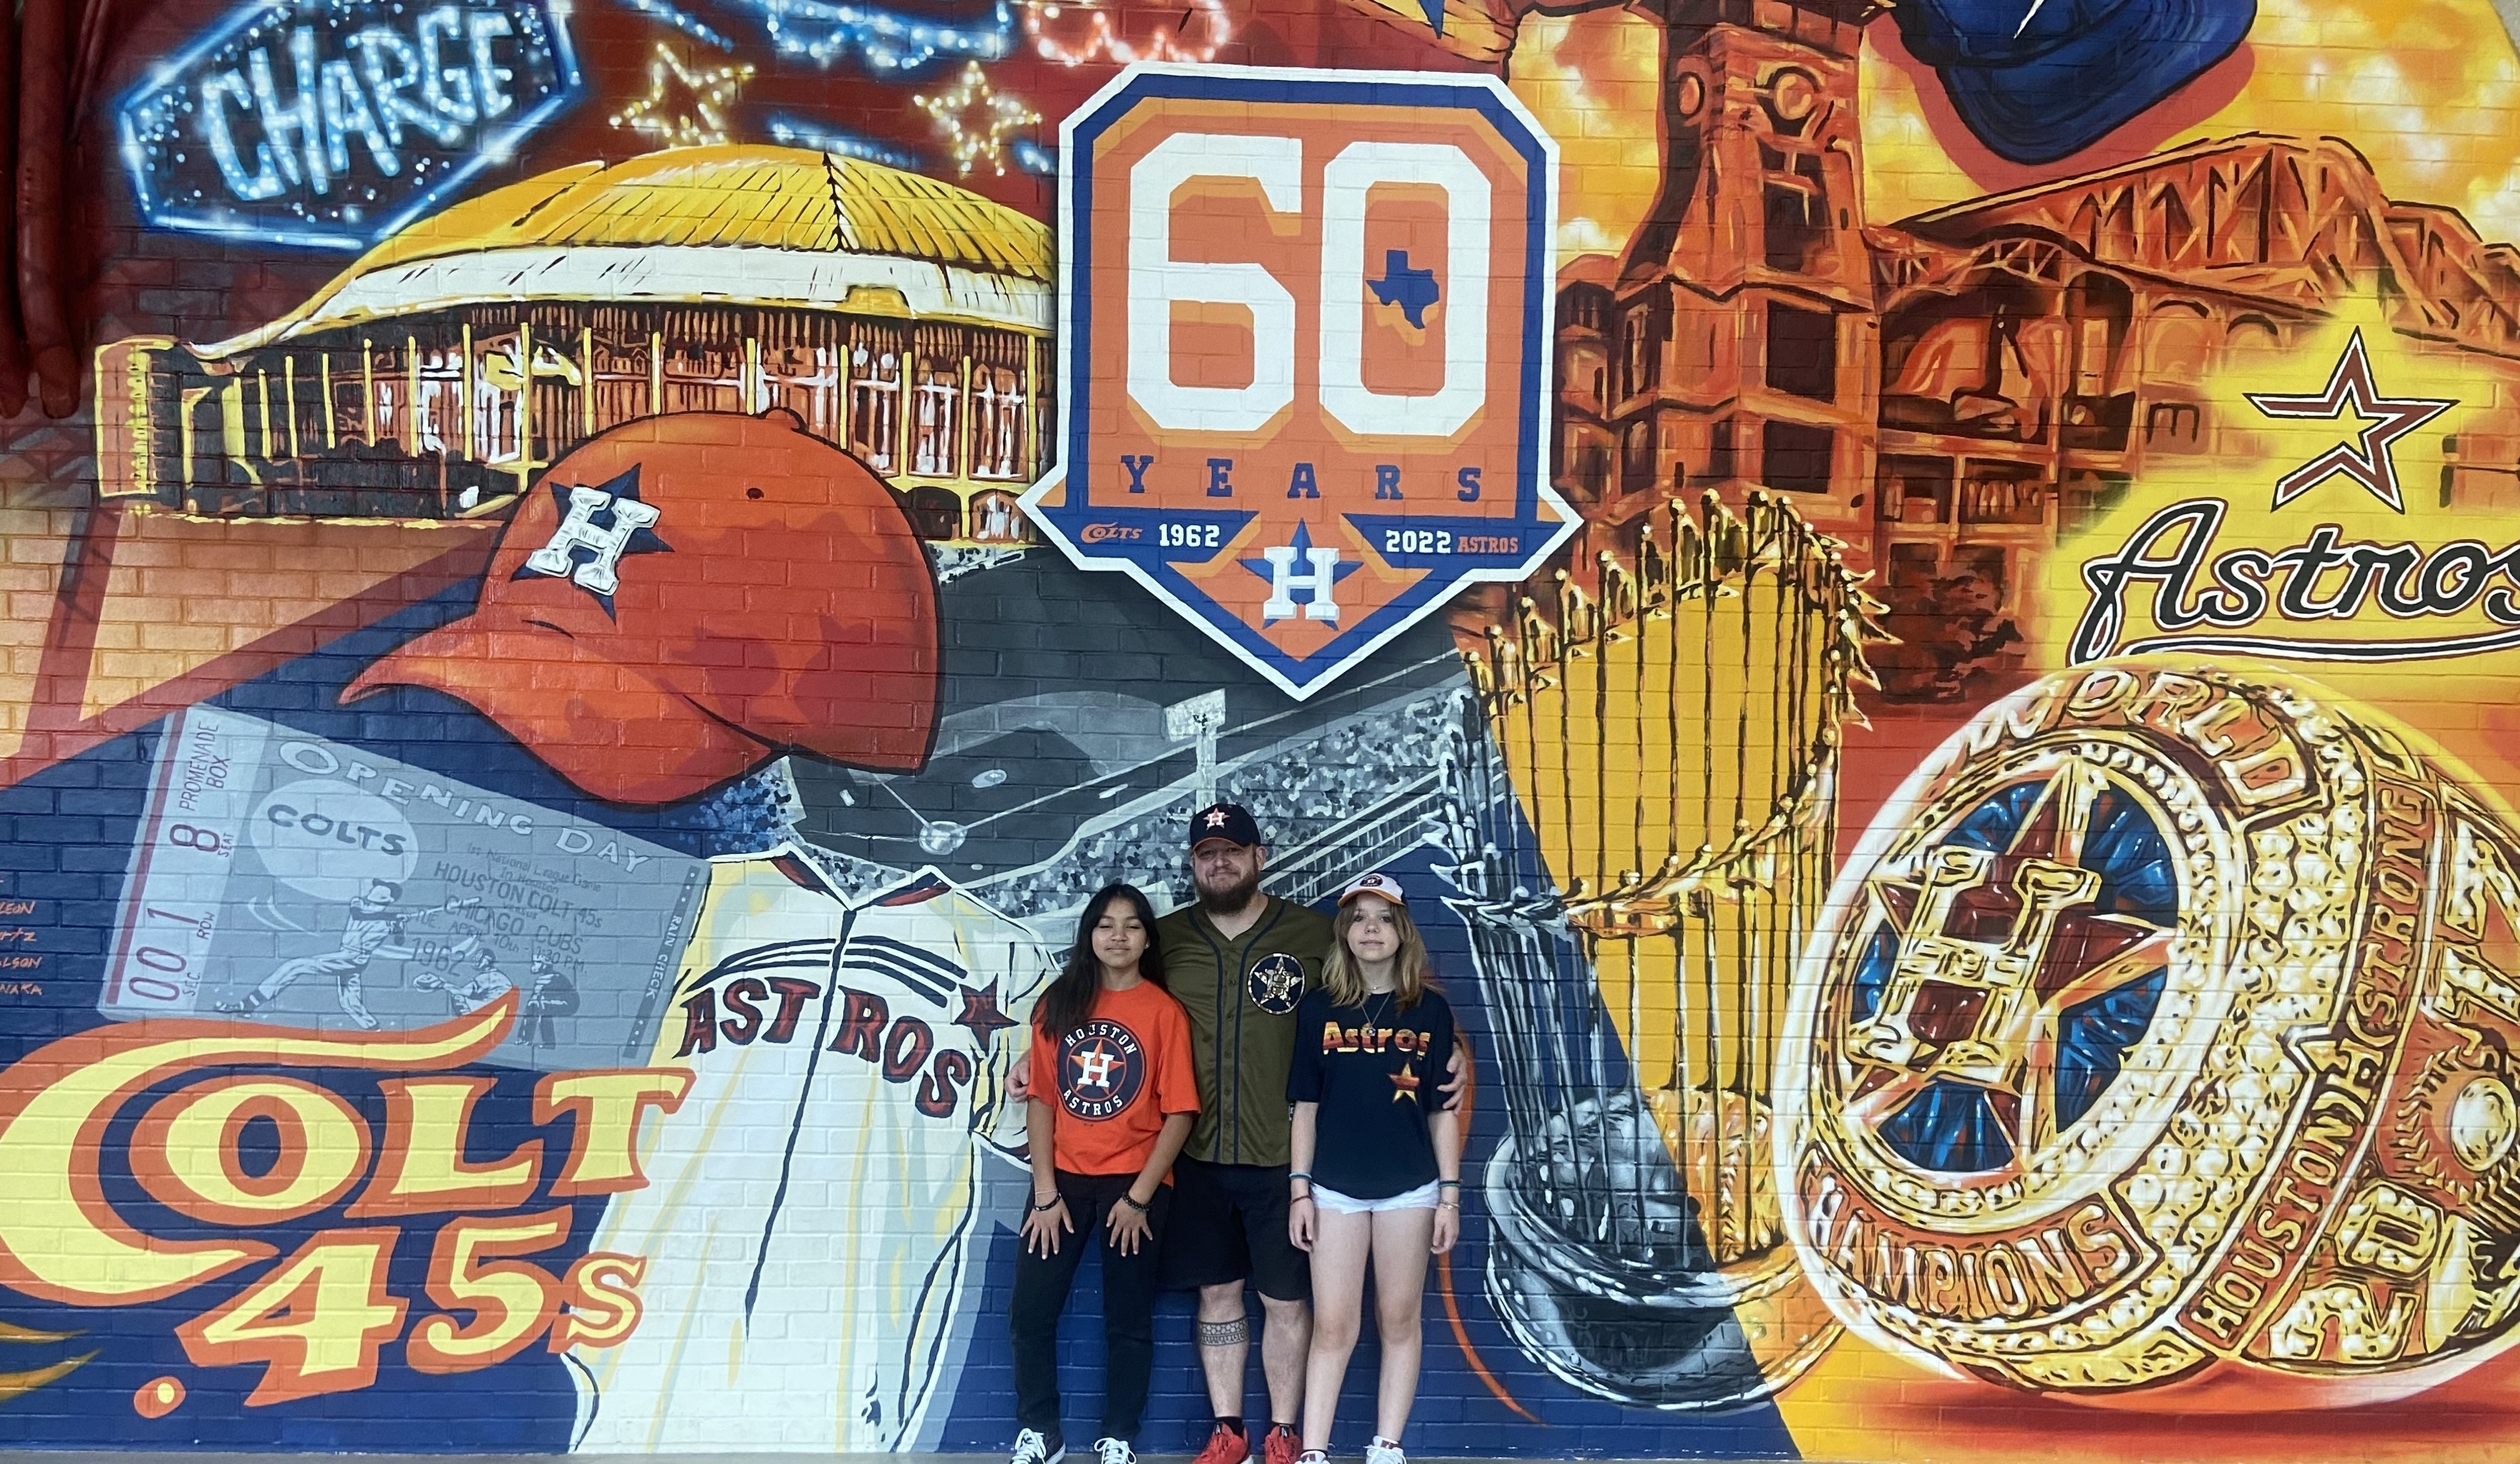 Houston Astros 60 years 1962 2022 thank you for the memories